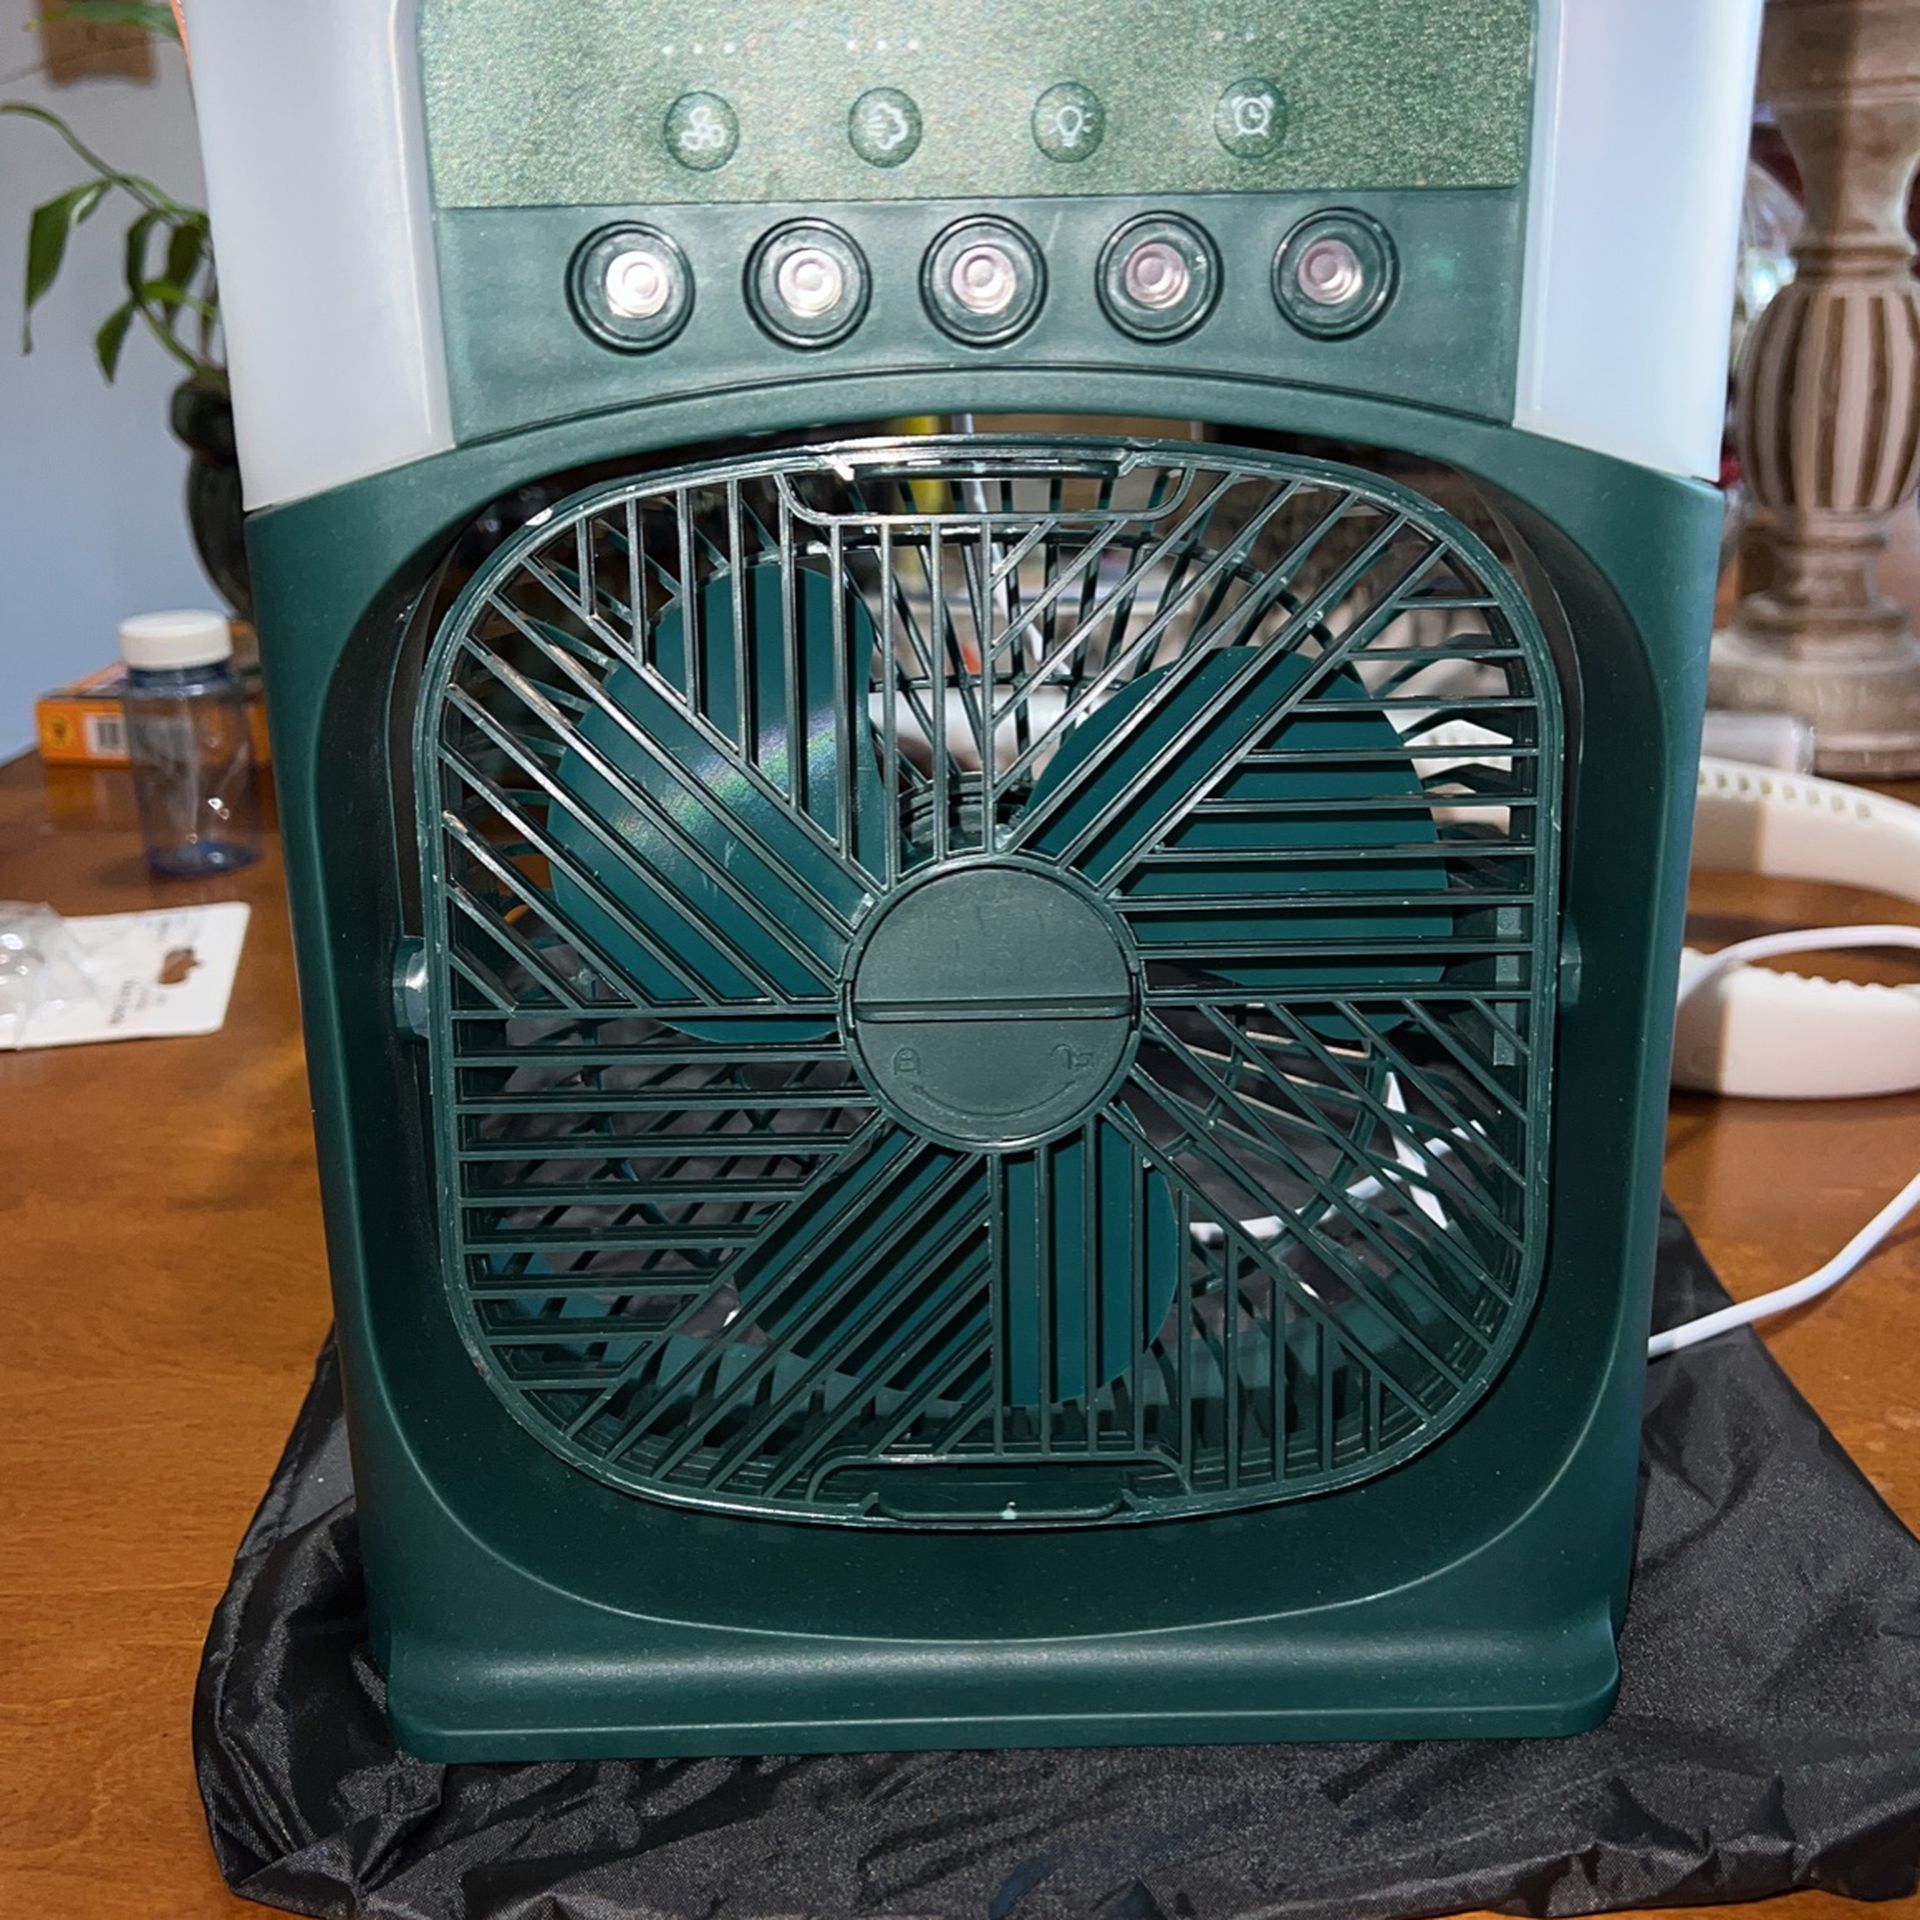 $5-Hydrocooling Portable Air Conditioner with 3 Speeds, Humidifier, and Spray Heads